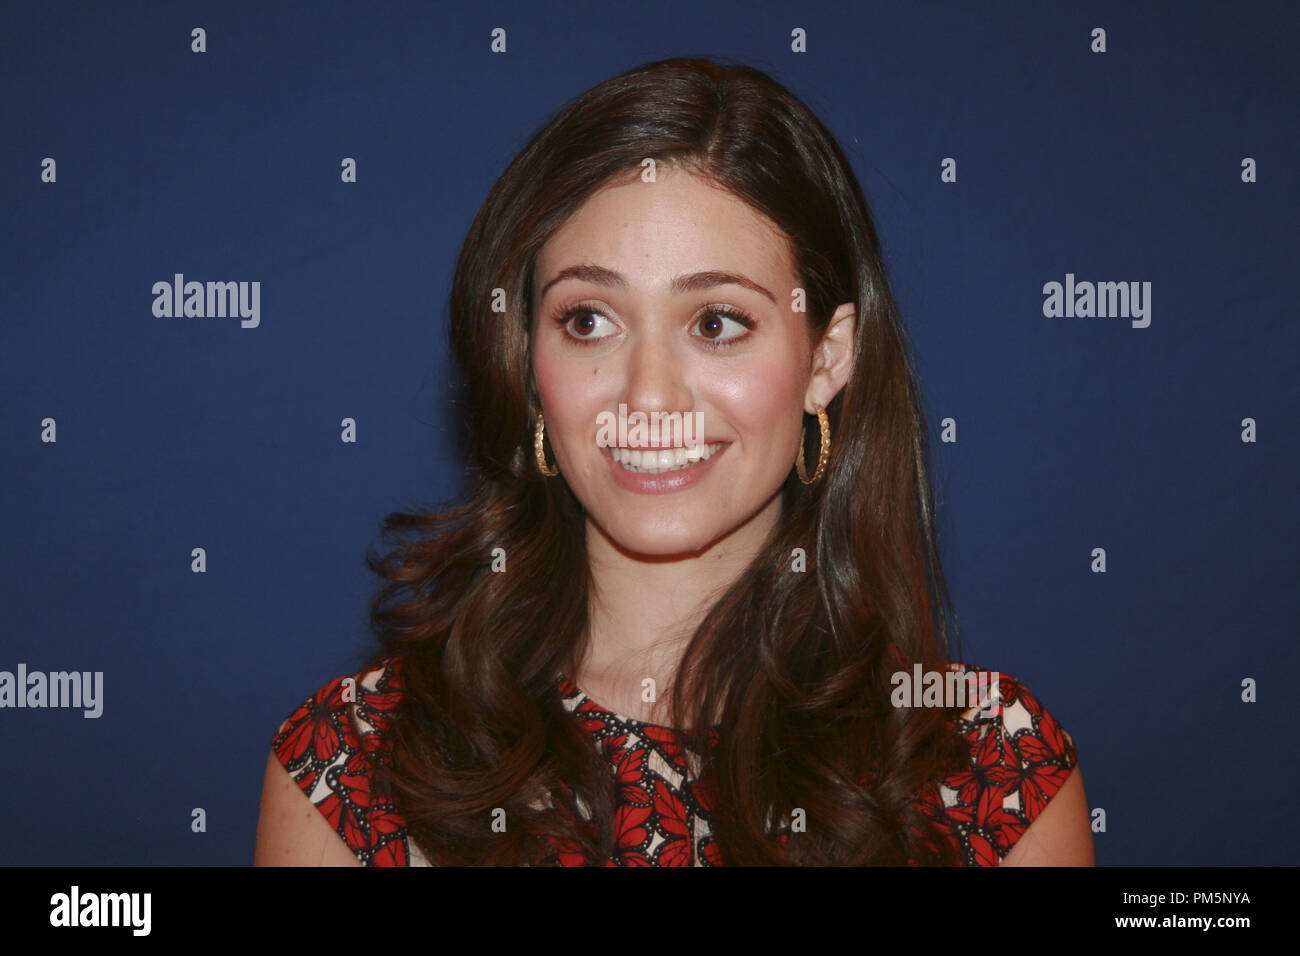 Emmy Rossum 'Shameless'  Portrait Session, March 16, 2011.  Reproduction by American tabloids is absolutely forbidden. File Reference # 30913 038JRC  For Editorial Use Only -  All Rights Reserved Stock Photo